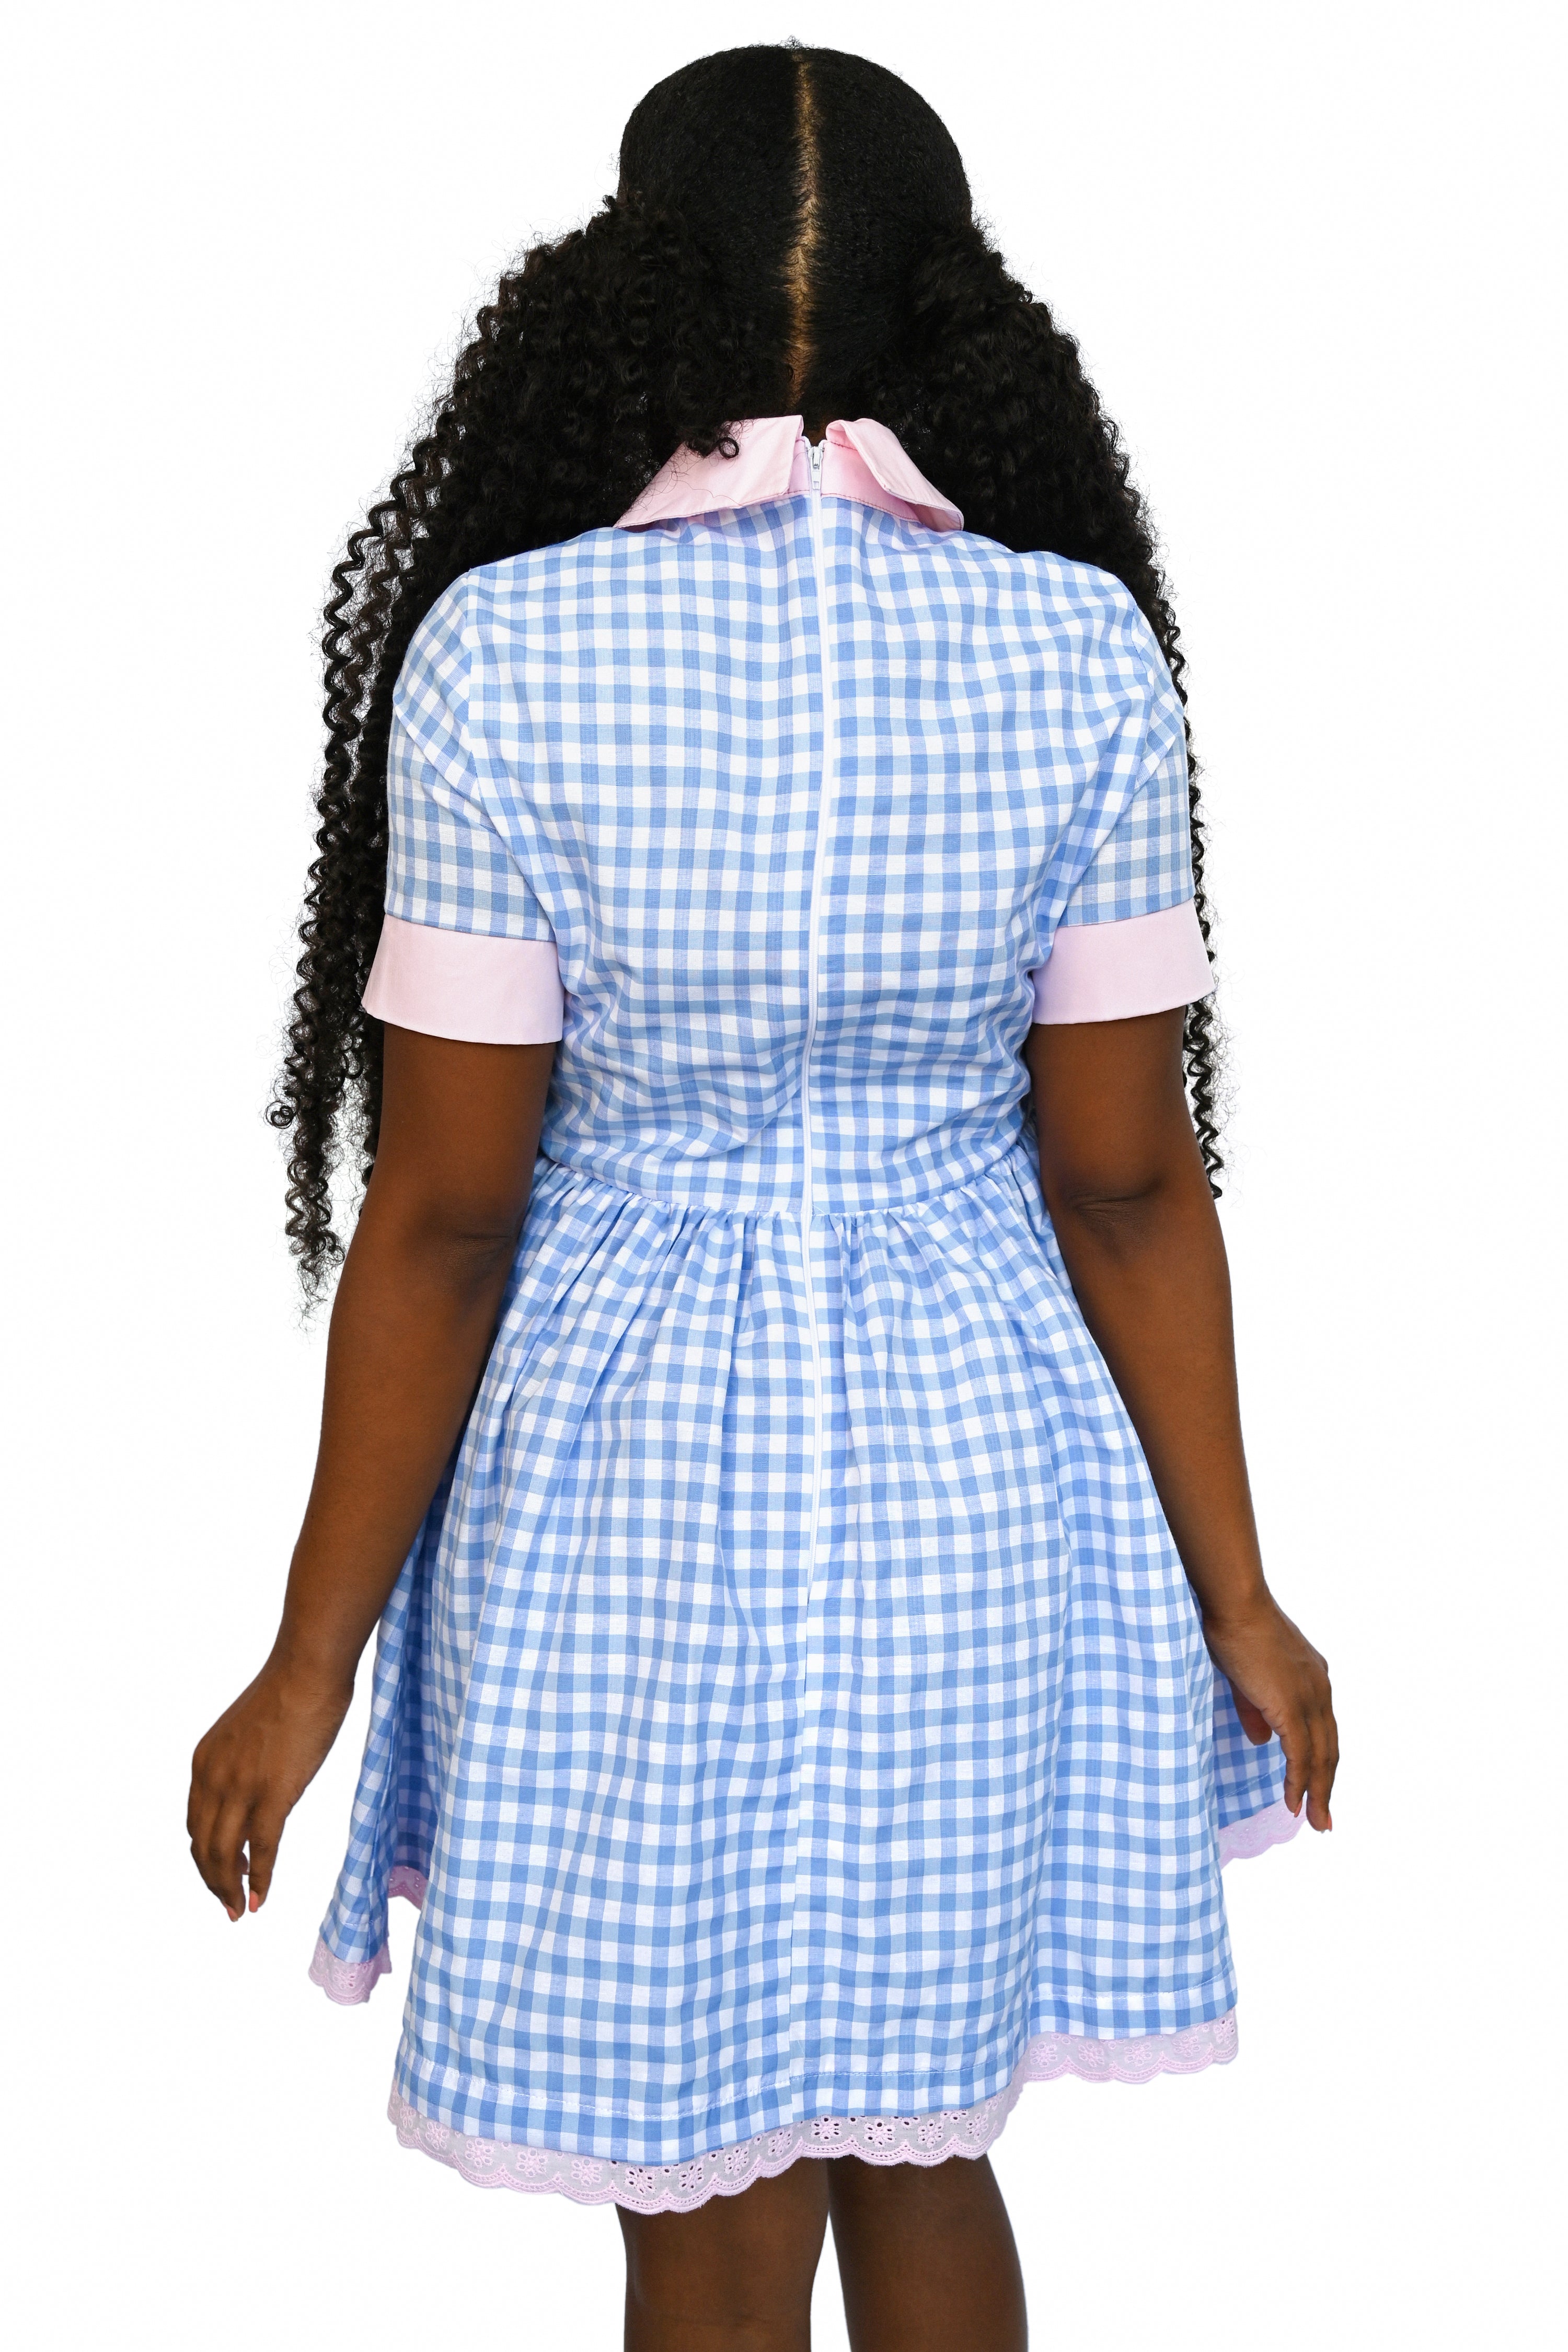 Knee length gingham dress with pink collar and trim, featuring a cute crying teddy bear graphic on the front